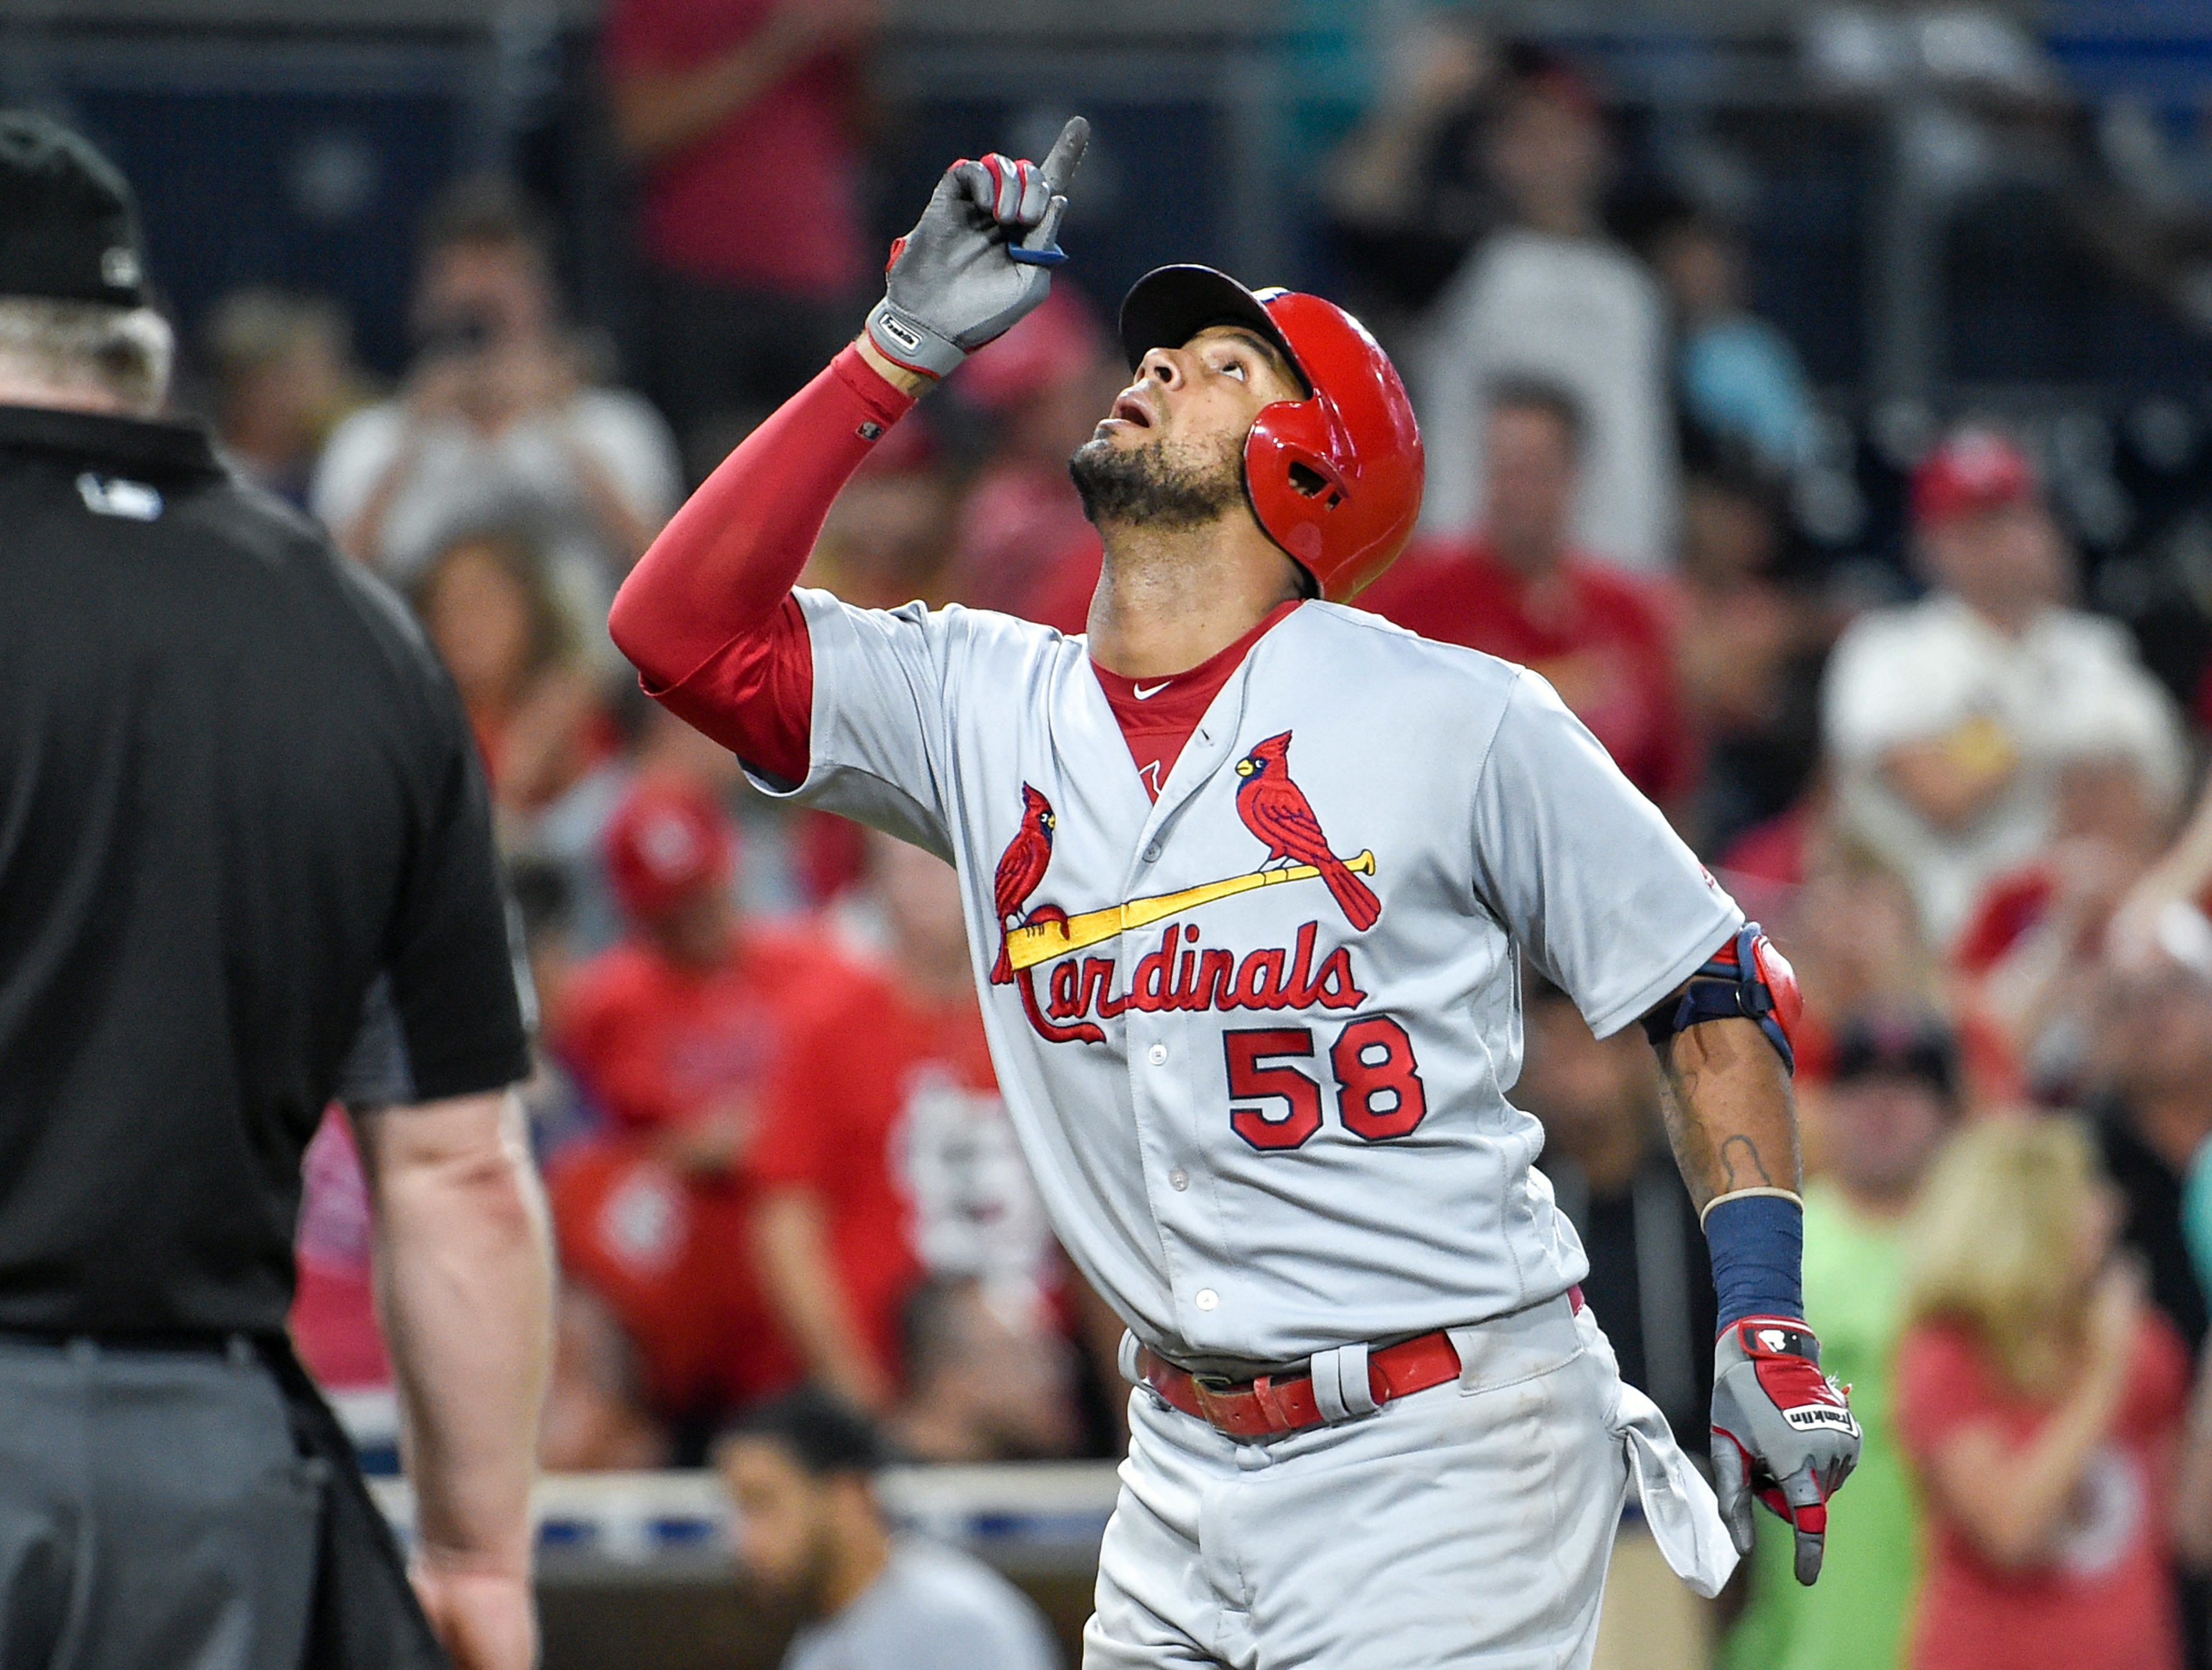 St. Louis Cardinals: Cards who could be traded in the off-season. - Page 3